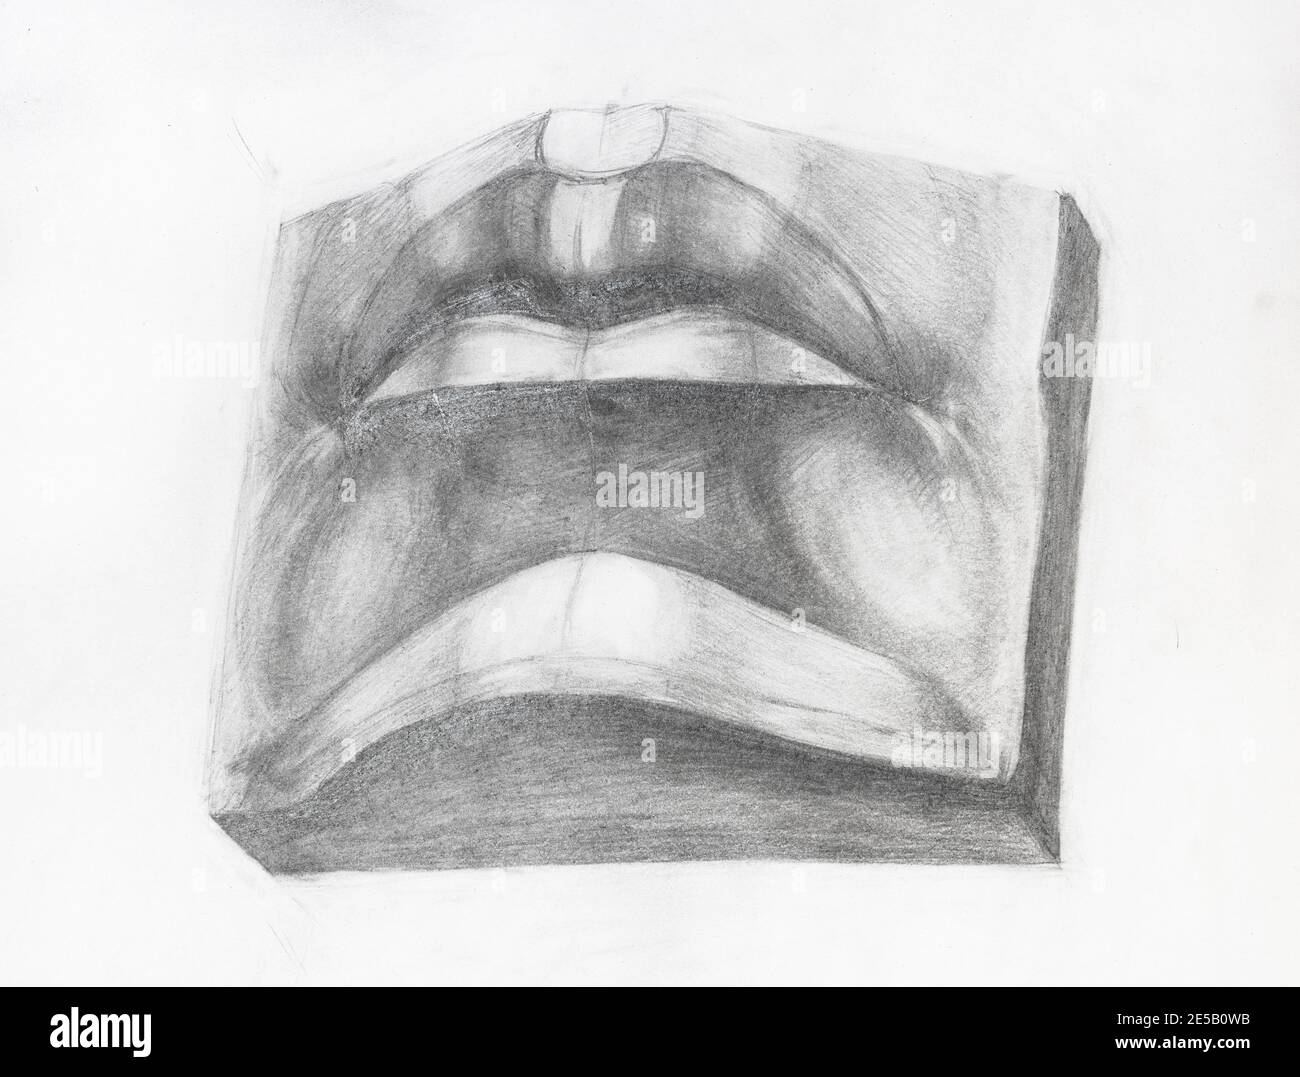 https://c8.alamy.com/comp/2E5B0WB/academic-drawing-male-mouth-plaster-cast-fragment-of-davids-face-hand-drawn-by-graphite-pencil-on-white-paper-2E5B0WB.jpg